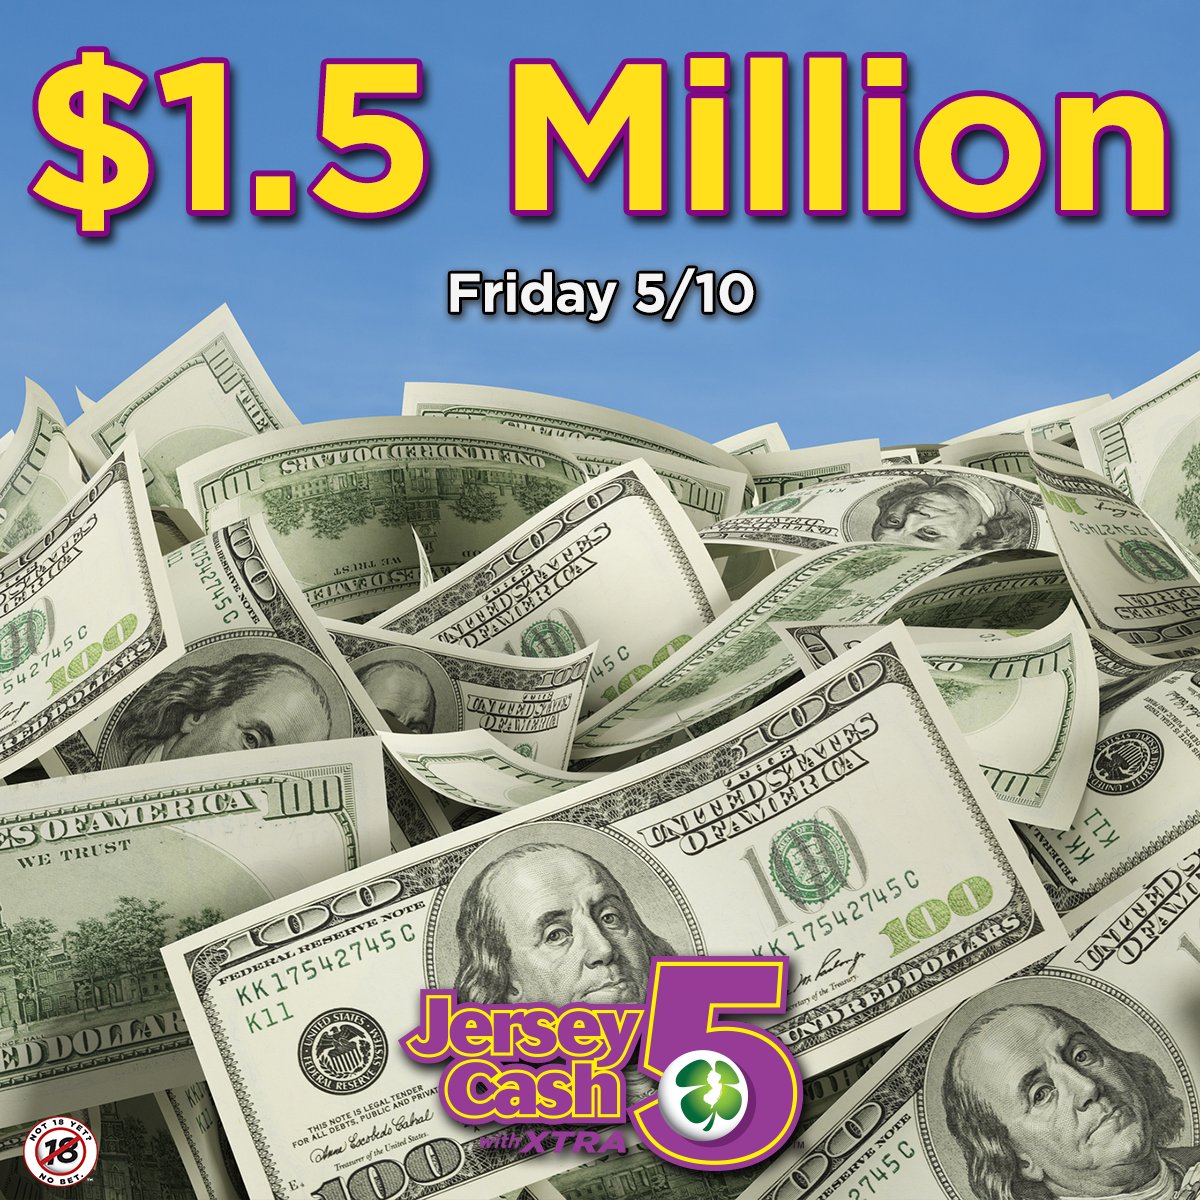 And it rolls… again! Tonight’s #JerseyCash5 jackpot is now $1.5 MILLION! Who’s getting their ticket?! For Jersey Cash 5 game odds, visit NJLottery.com/JerseyCash5. #AnythingCanHappenInJersey🍀